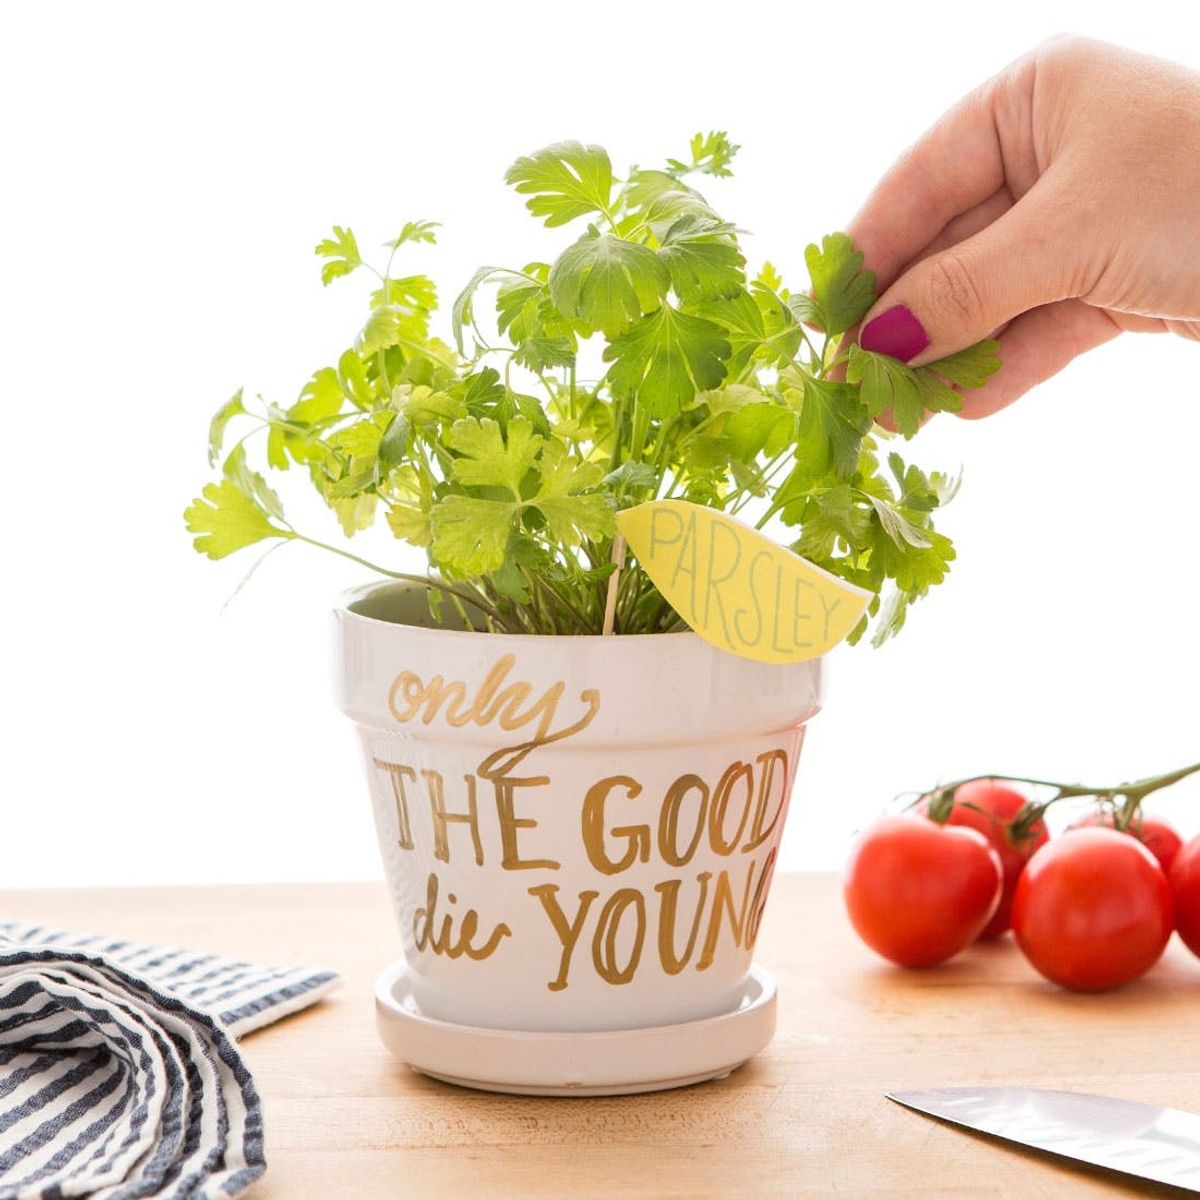 Freshen Up Your Home Cooking With This DIY Potted Parsley